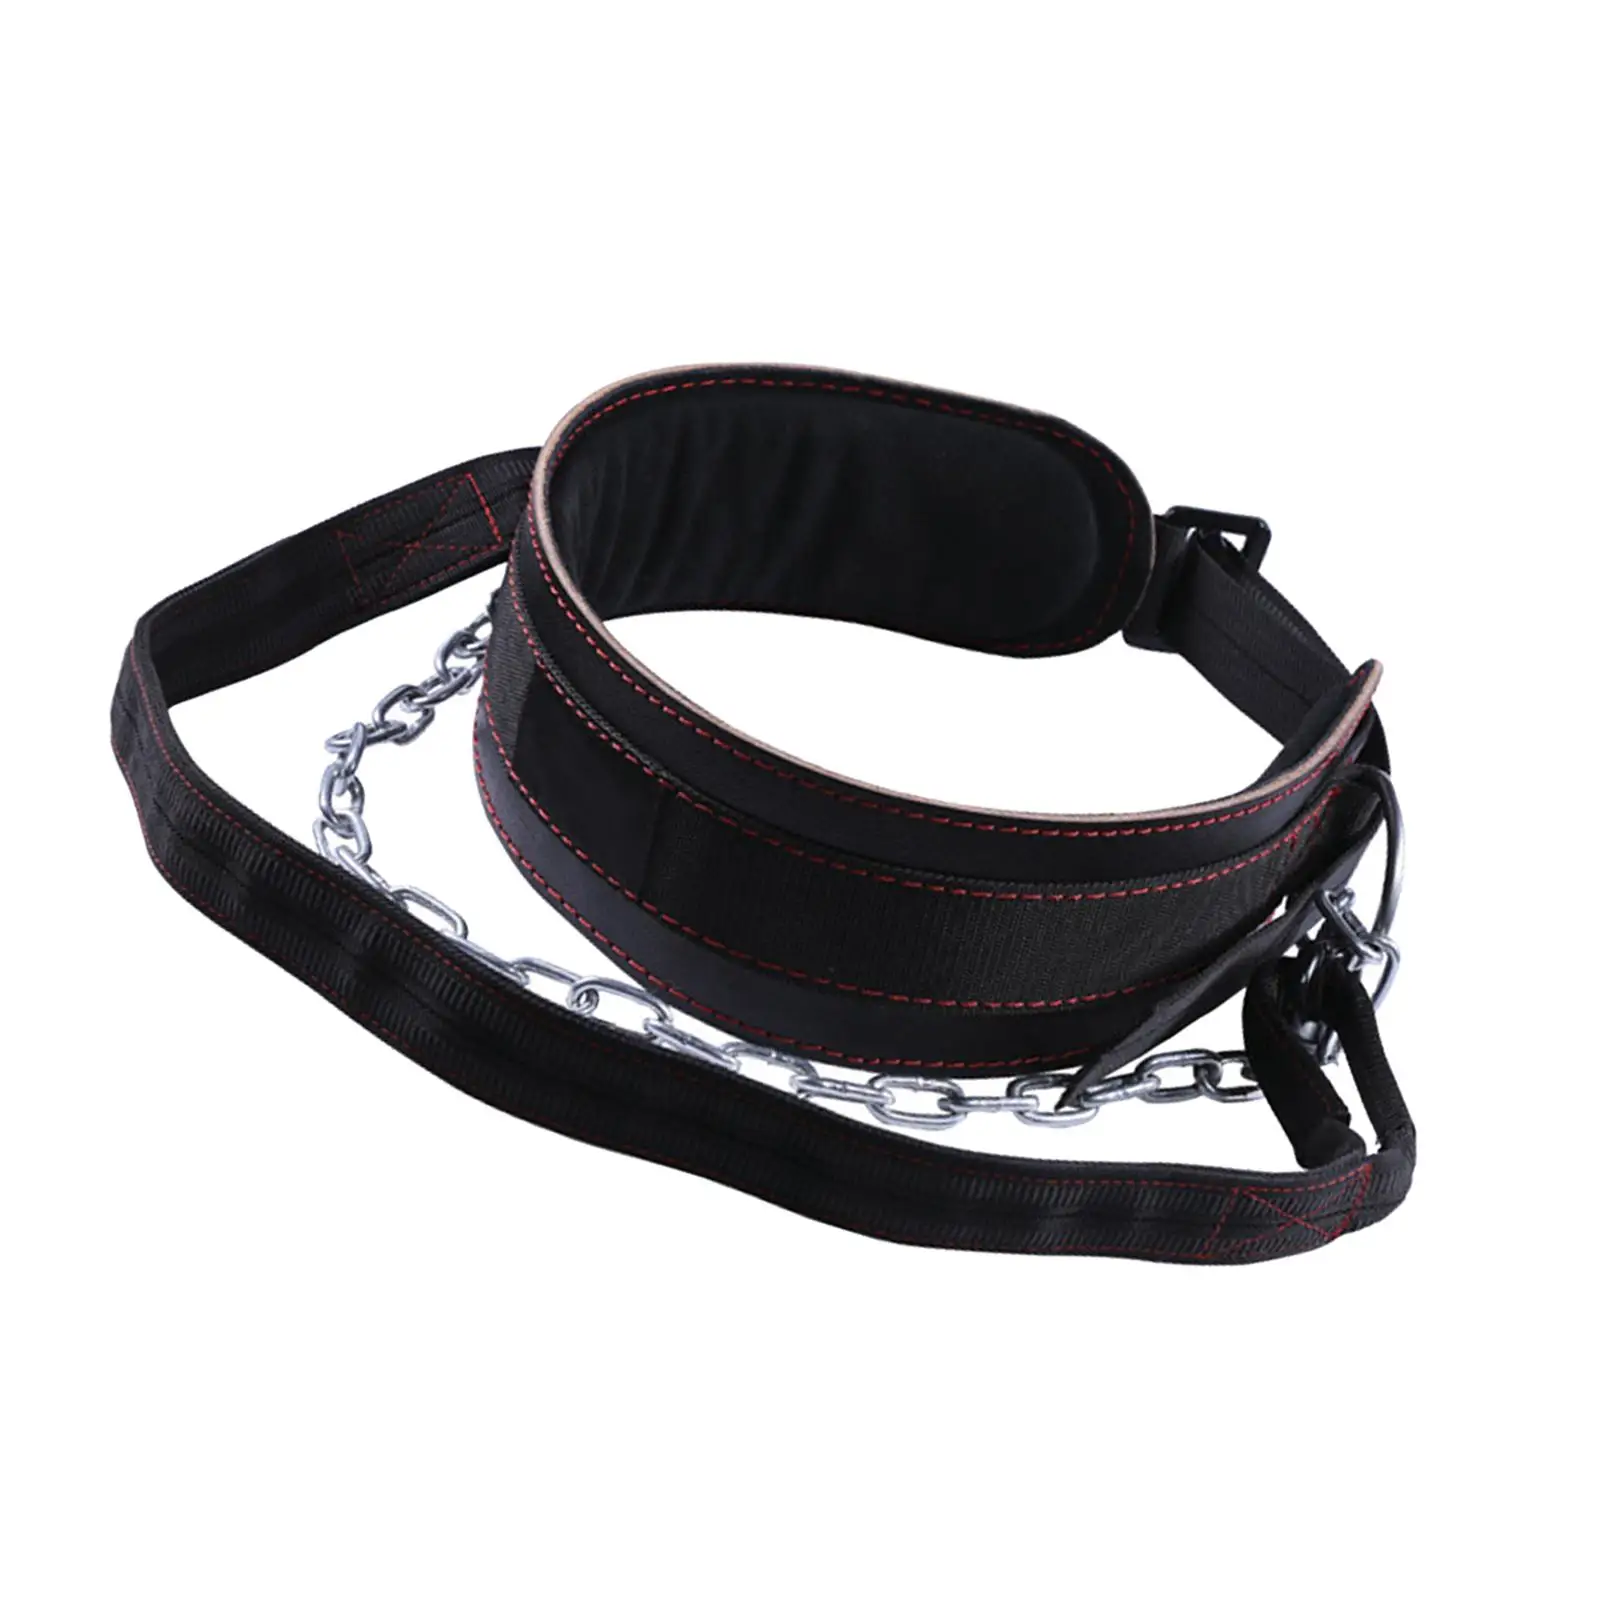 Pull Ups Belt with Chain Heavy Duty Wide Training Toner Workout Exercise Gym Belt Lifting Belt for Pull up Musculation